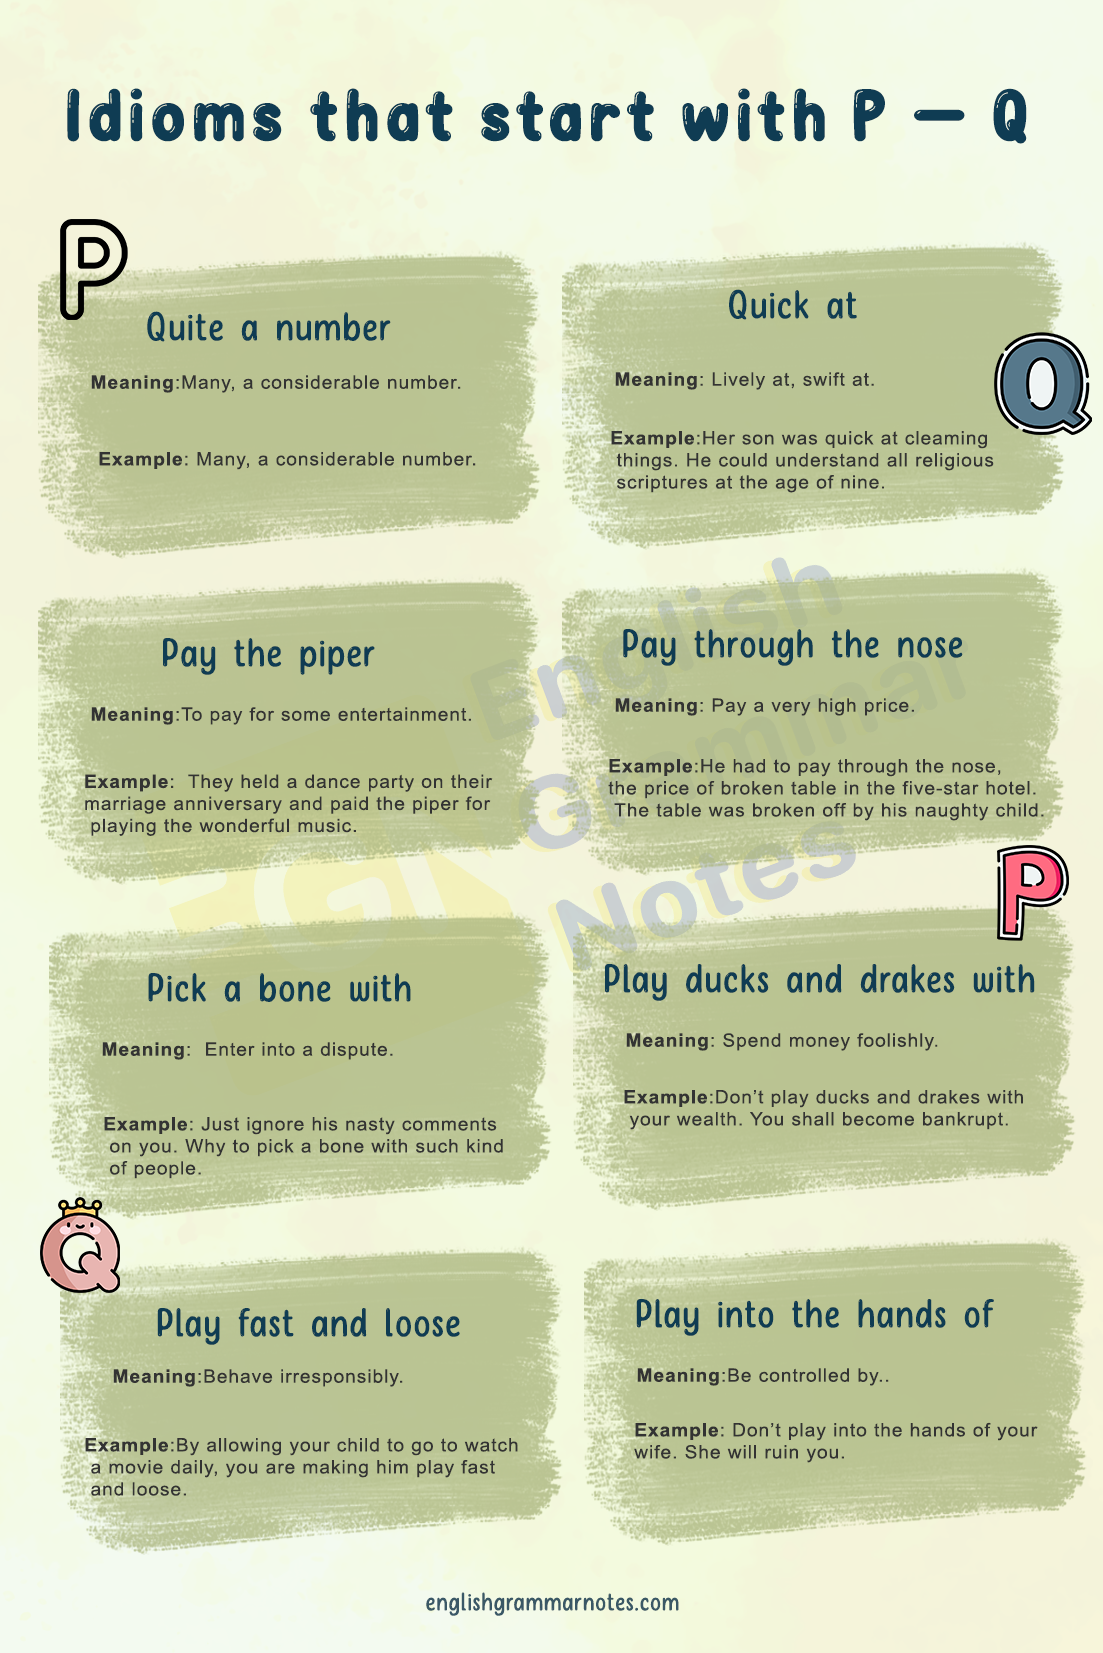 Idioms that start with P - Q 2